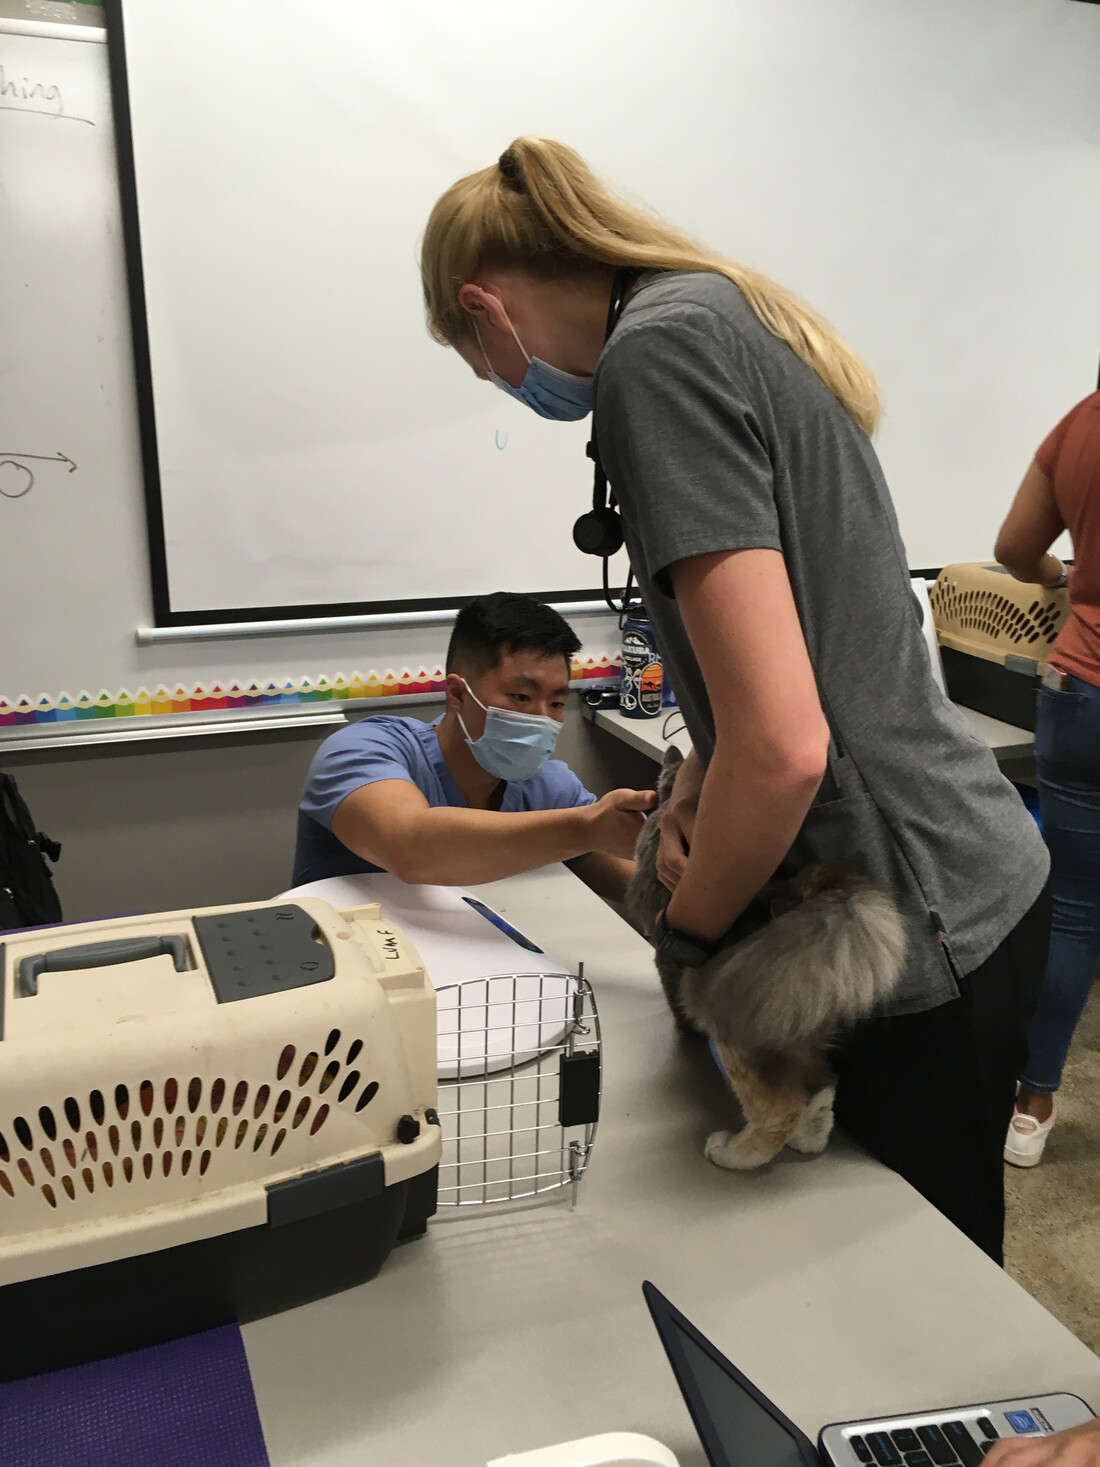 Vet student examining a grey cat held by another vet student